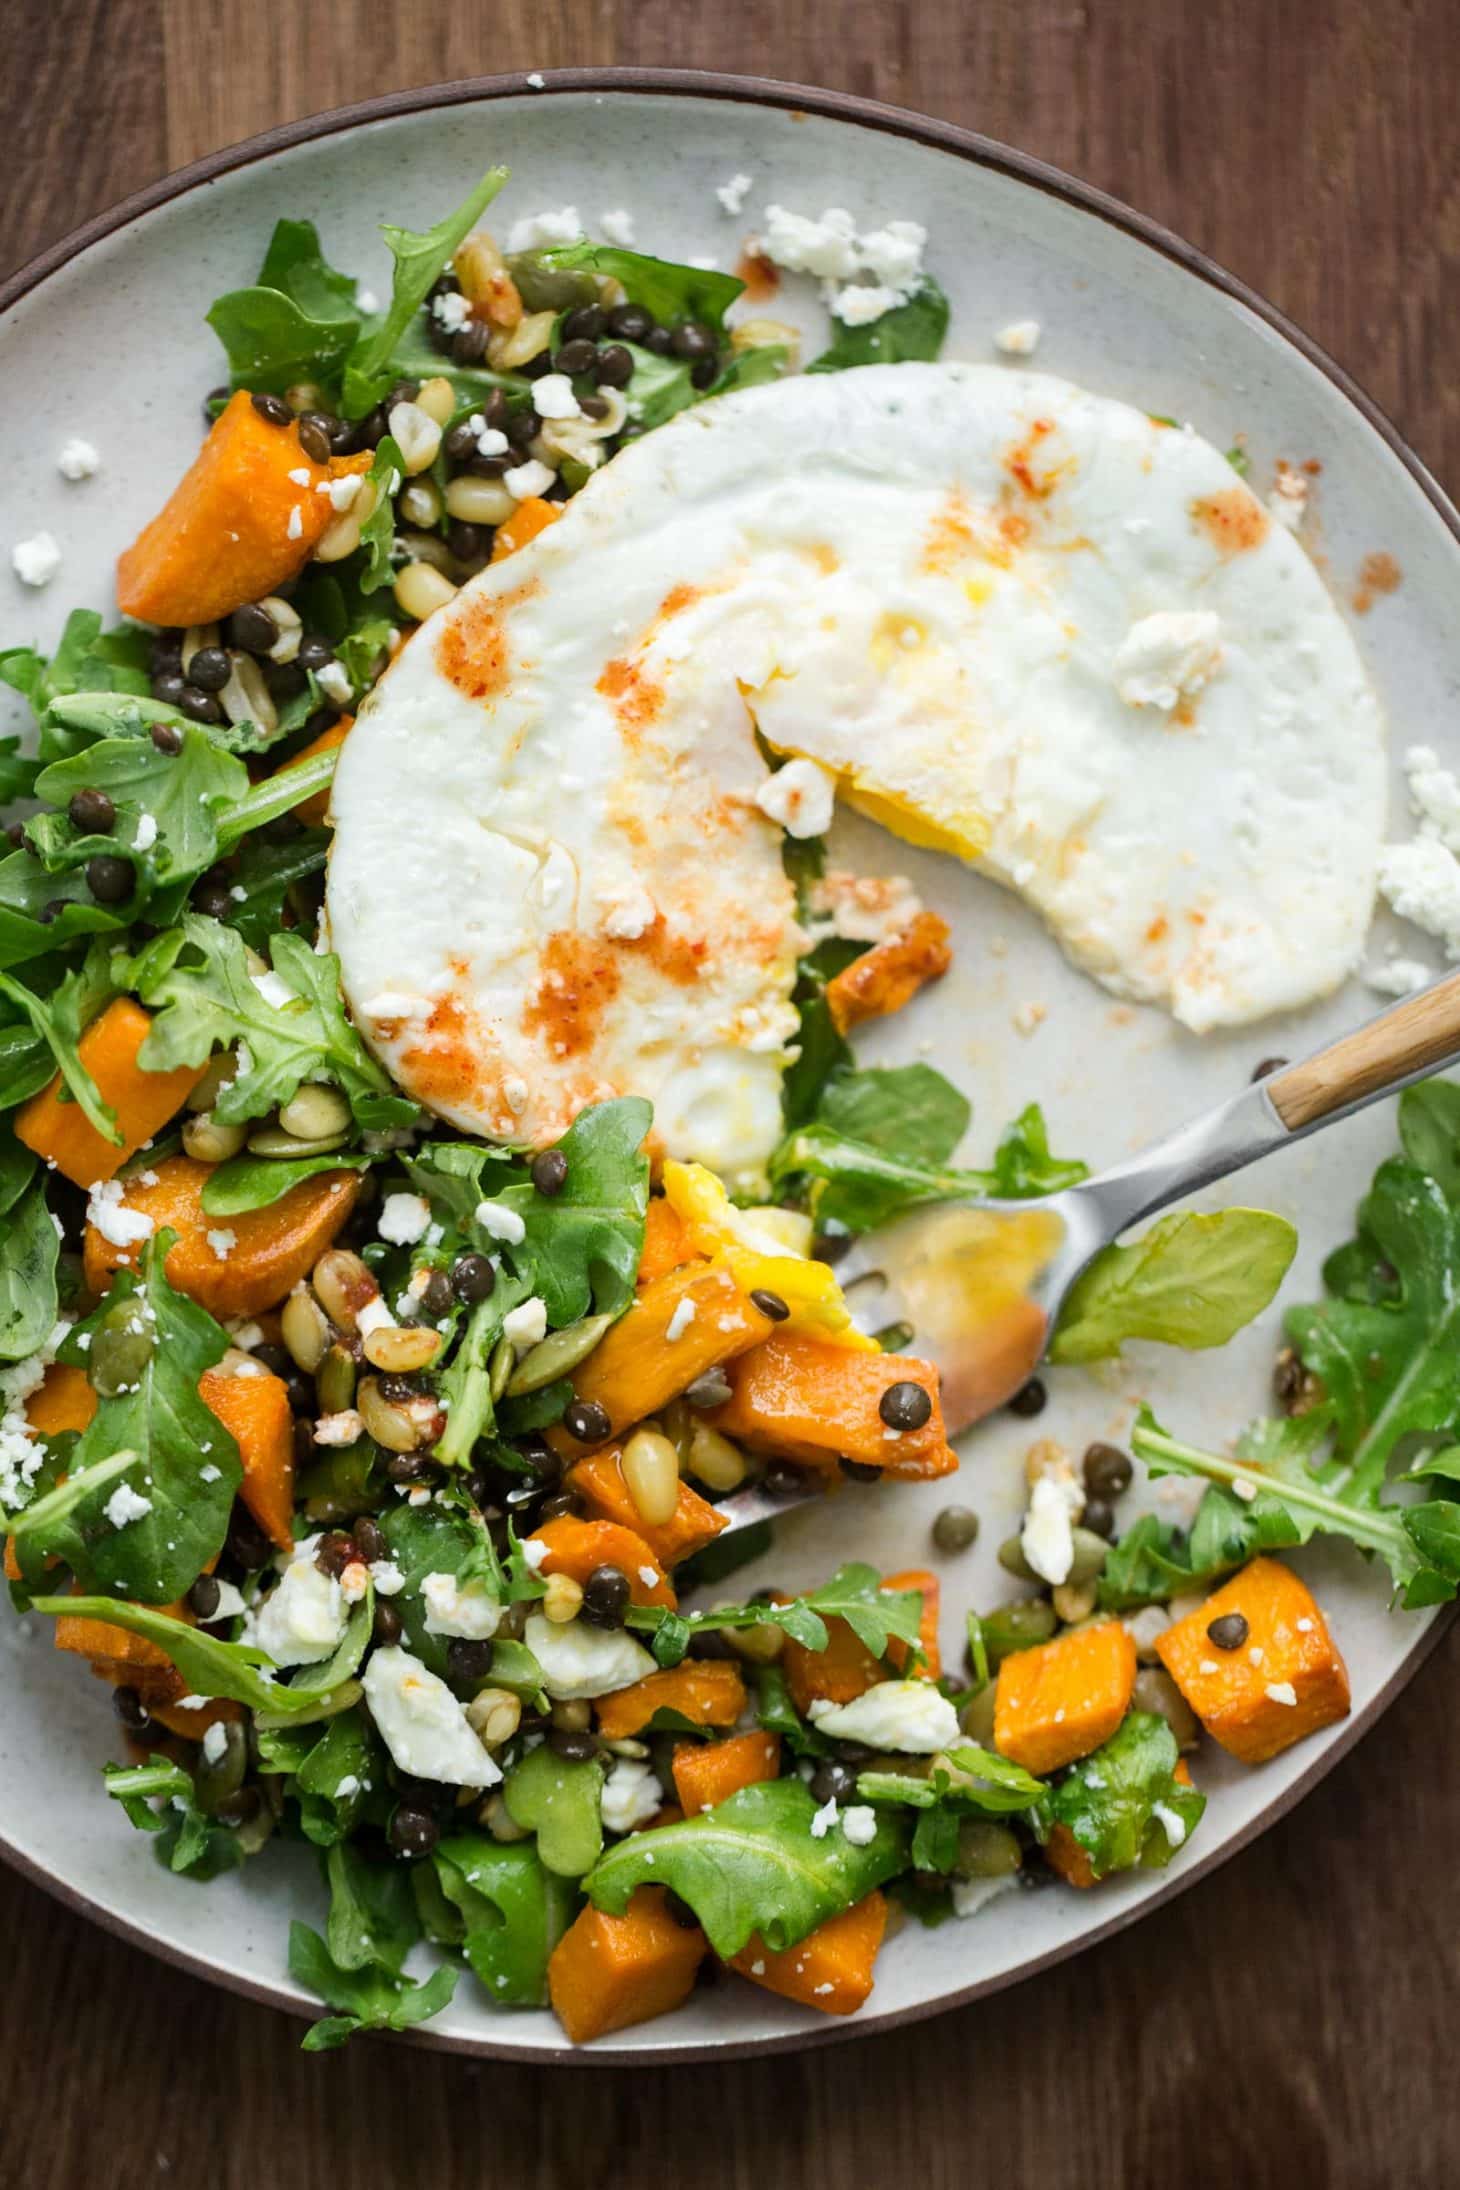 Sweet Potato Salad with Lentils and Fried Egg